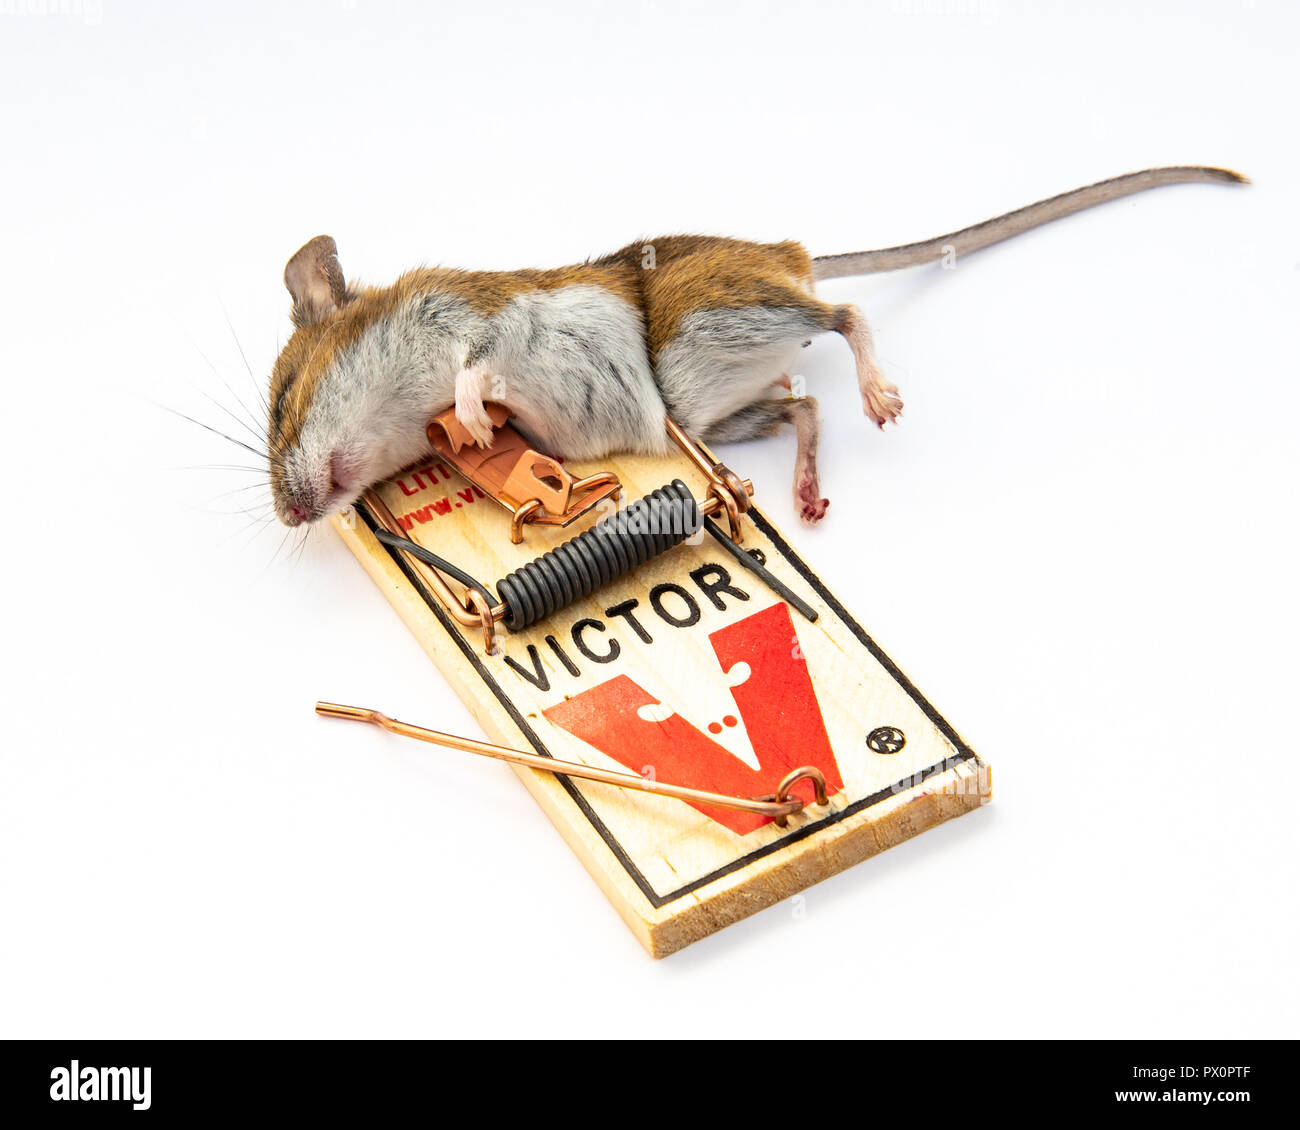 https://c8.alamy.com/comp/PX0PTF/dead-mouse-caught-in-victor-mouse-trap-PX0PTF.jpg